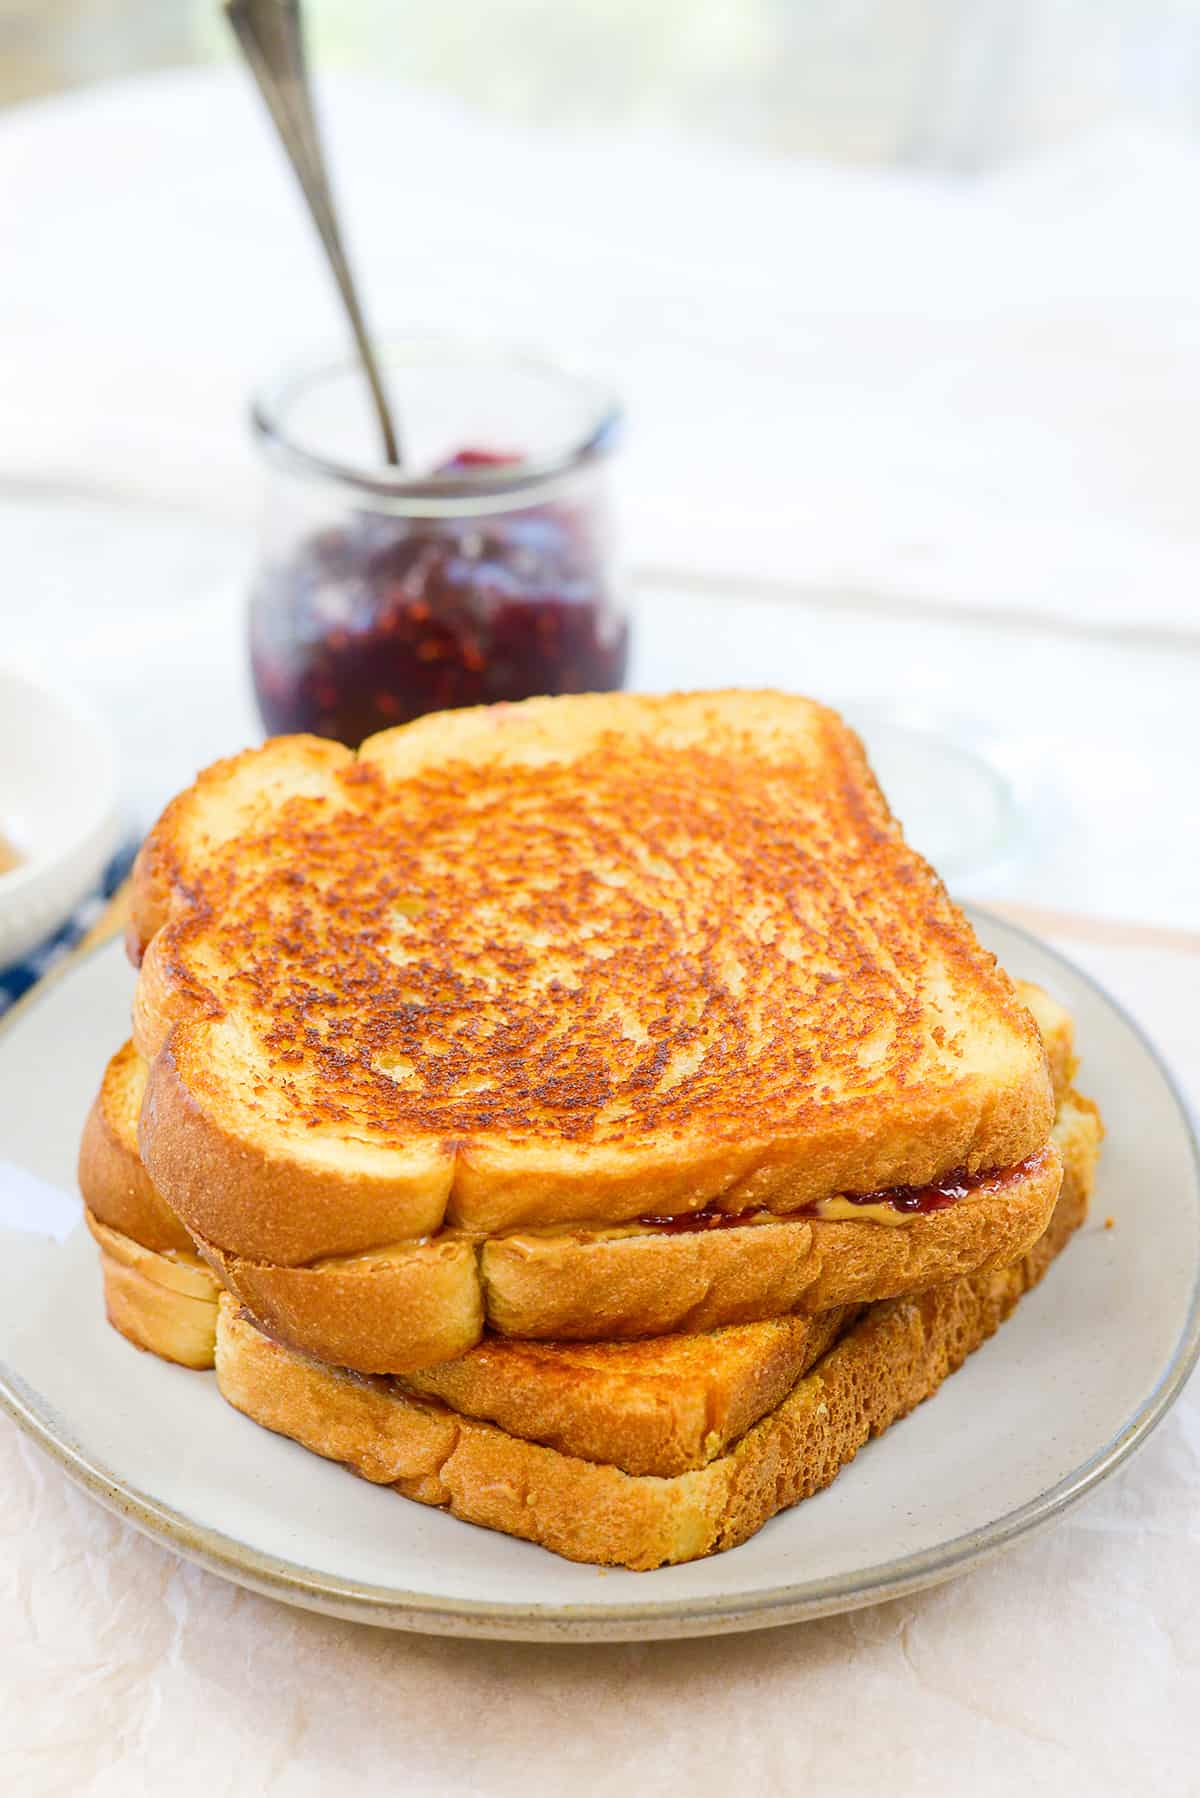 Stack of grilled peanut butter and jelly sandwiches on white plate.